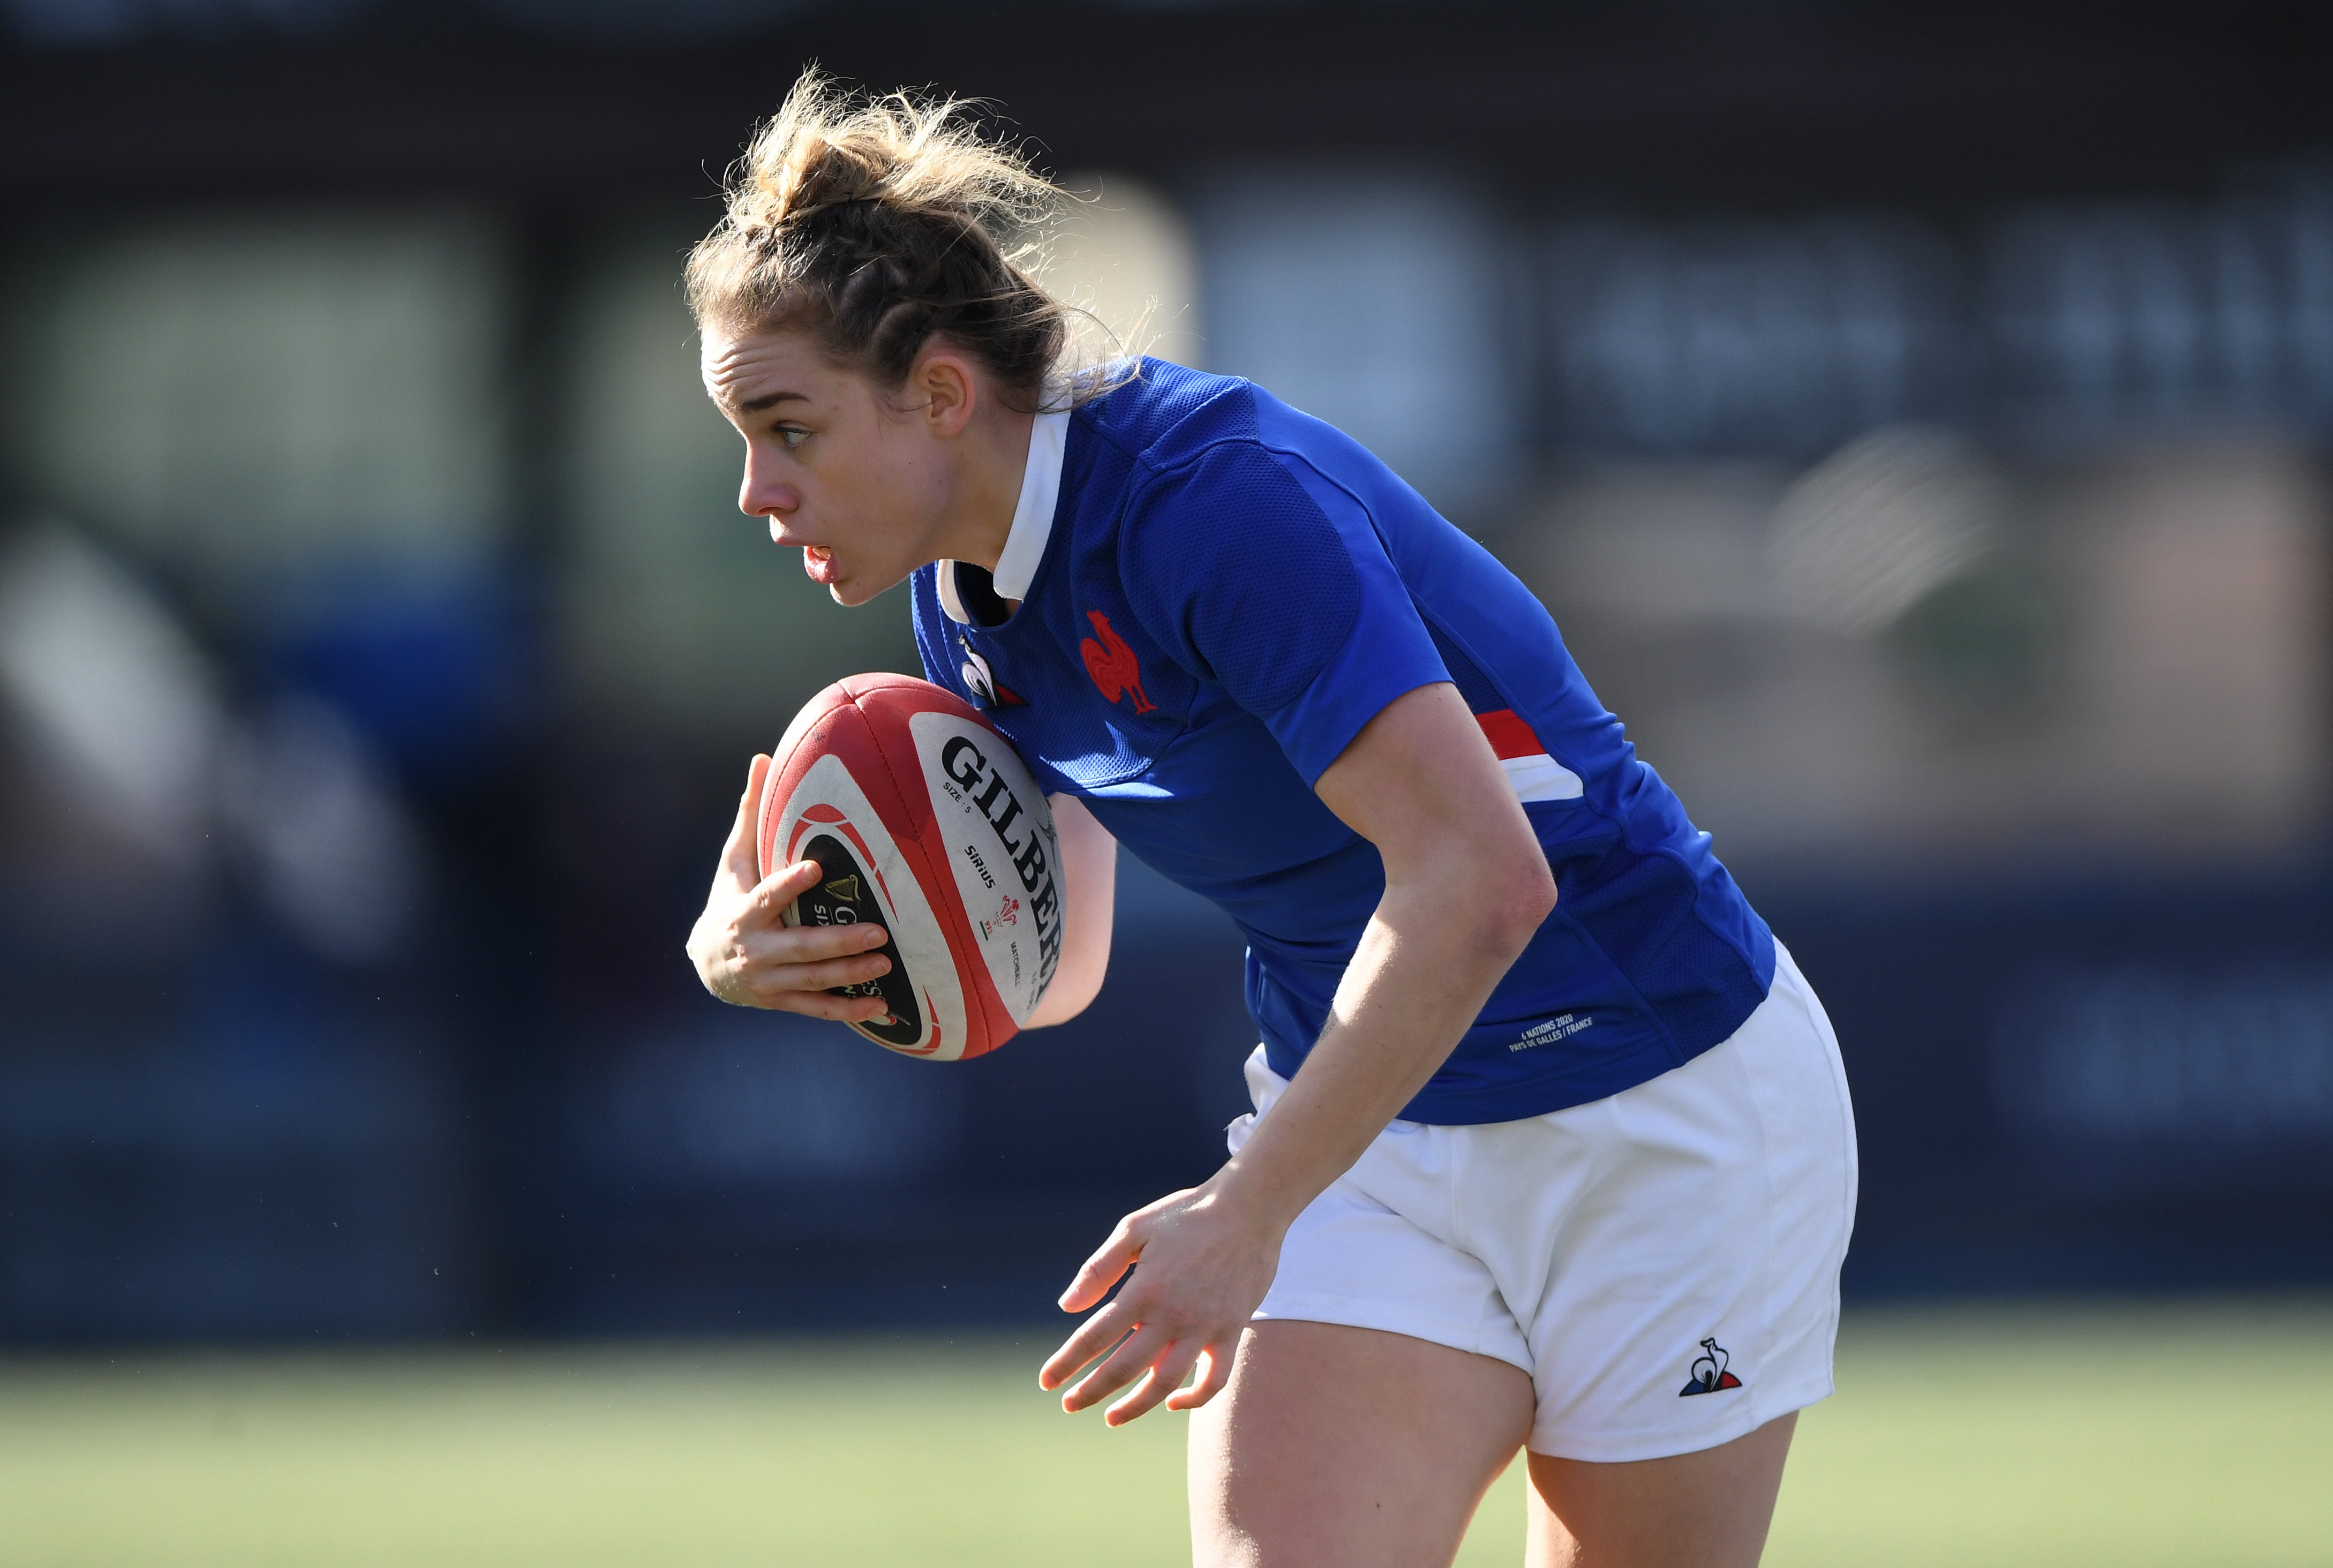 Marine Menager scored a French try in the win over Ireland